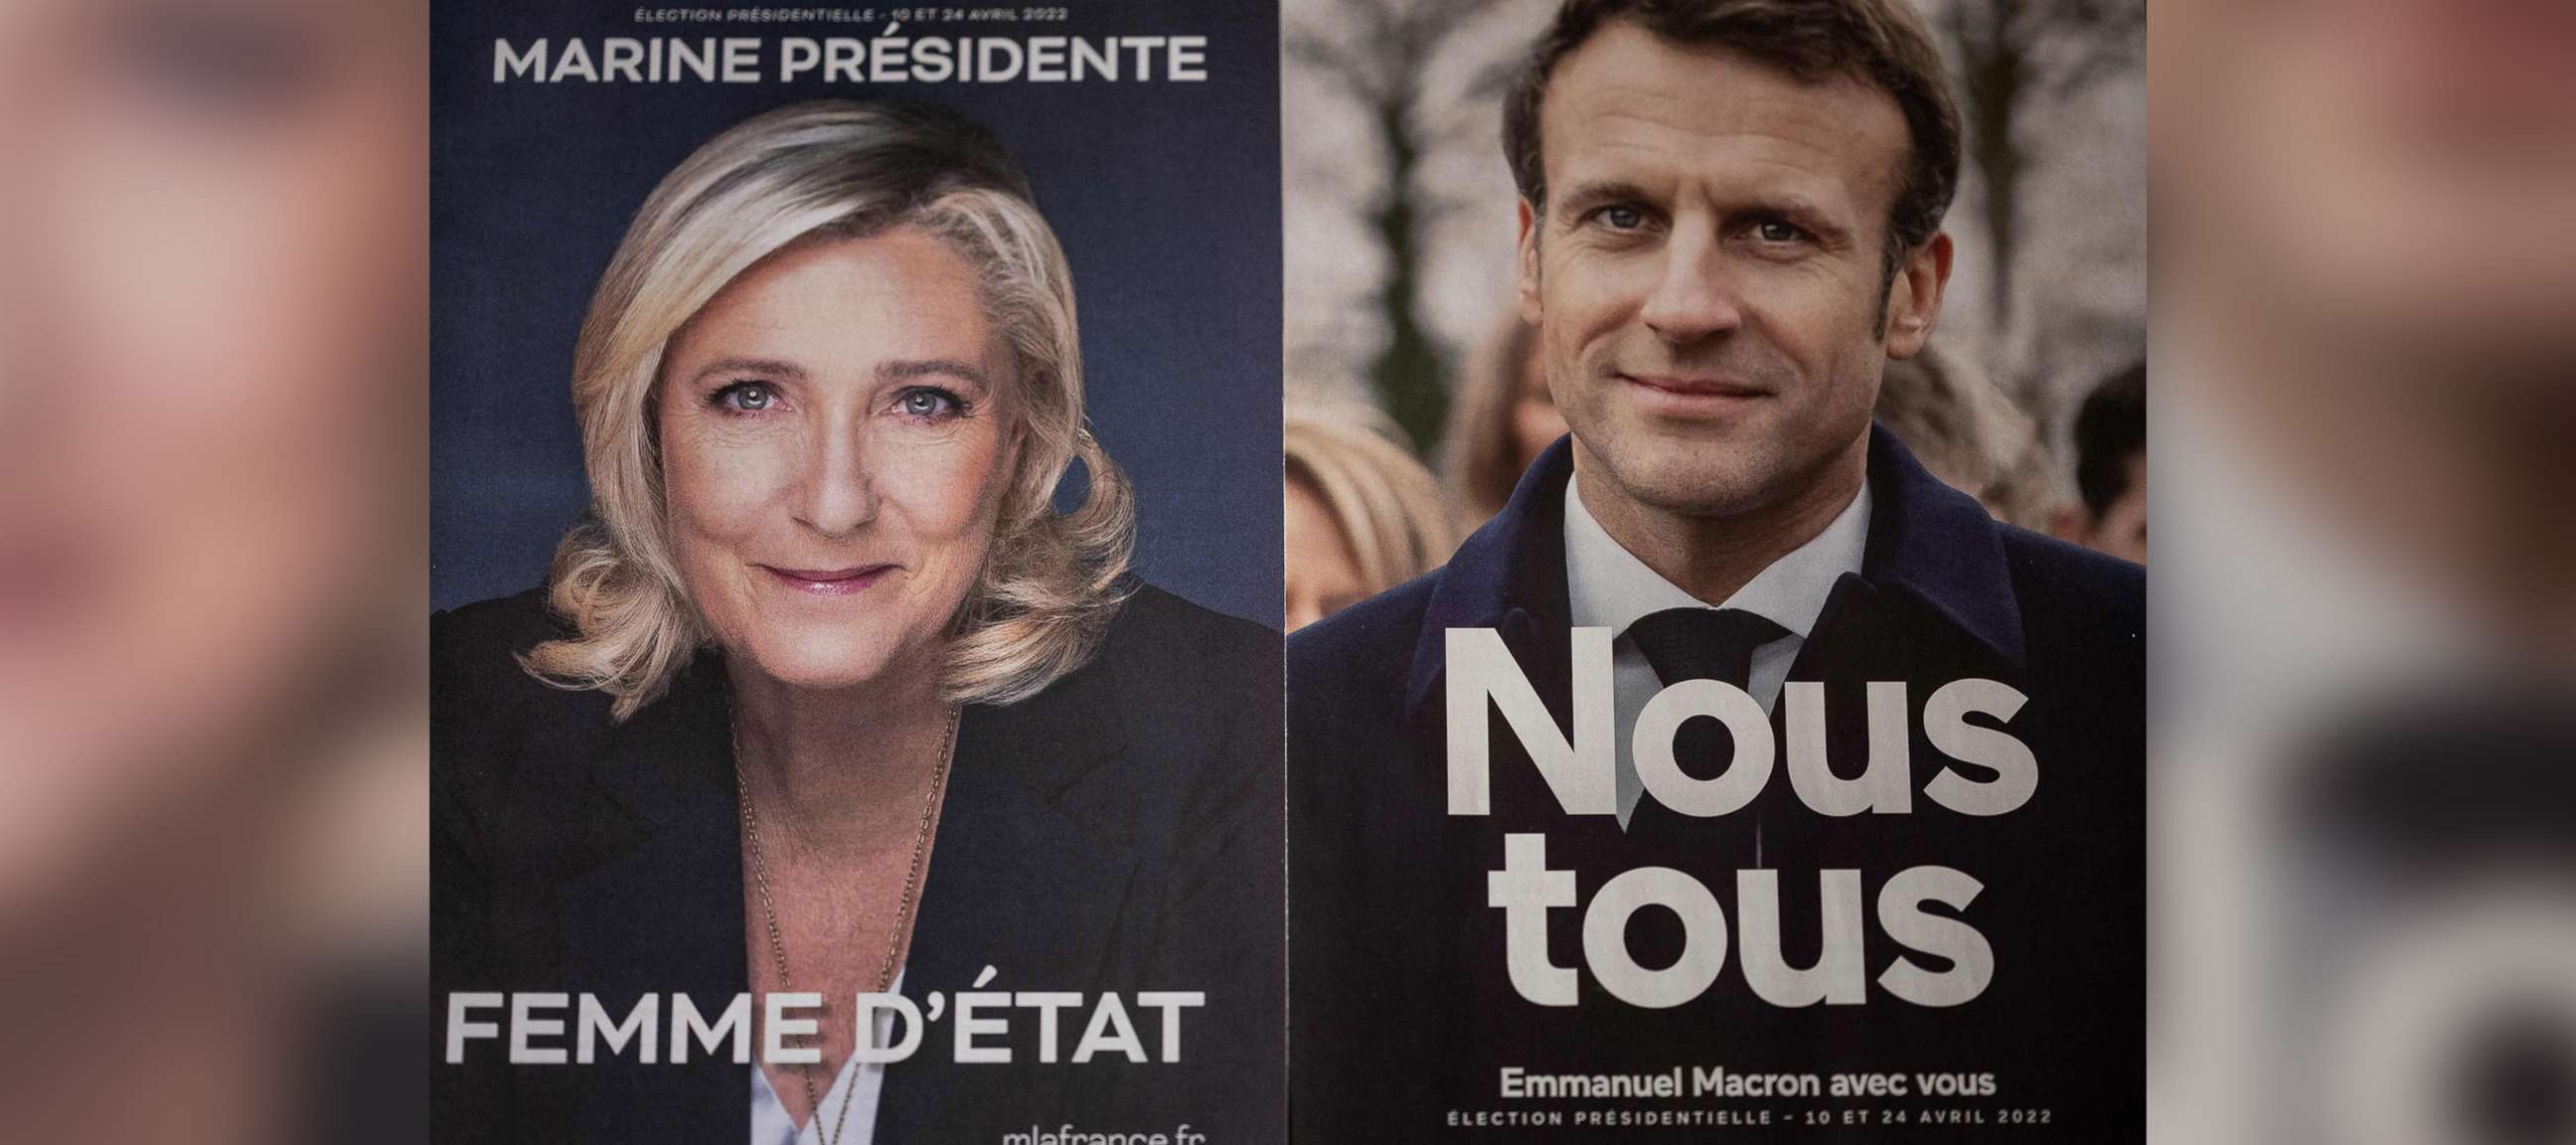 Macron vs. Le Pen: The French presidential election runoff explained